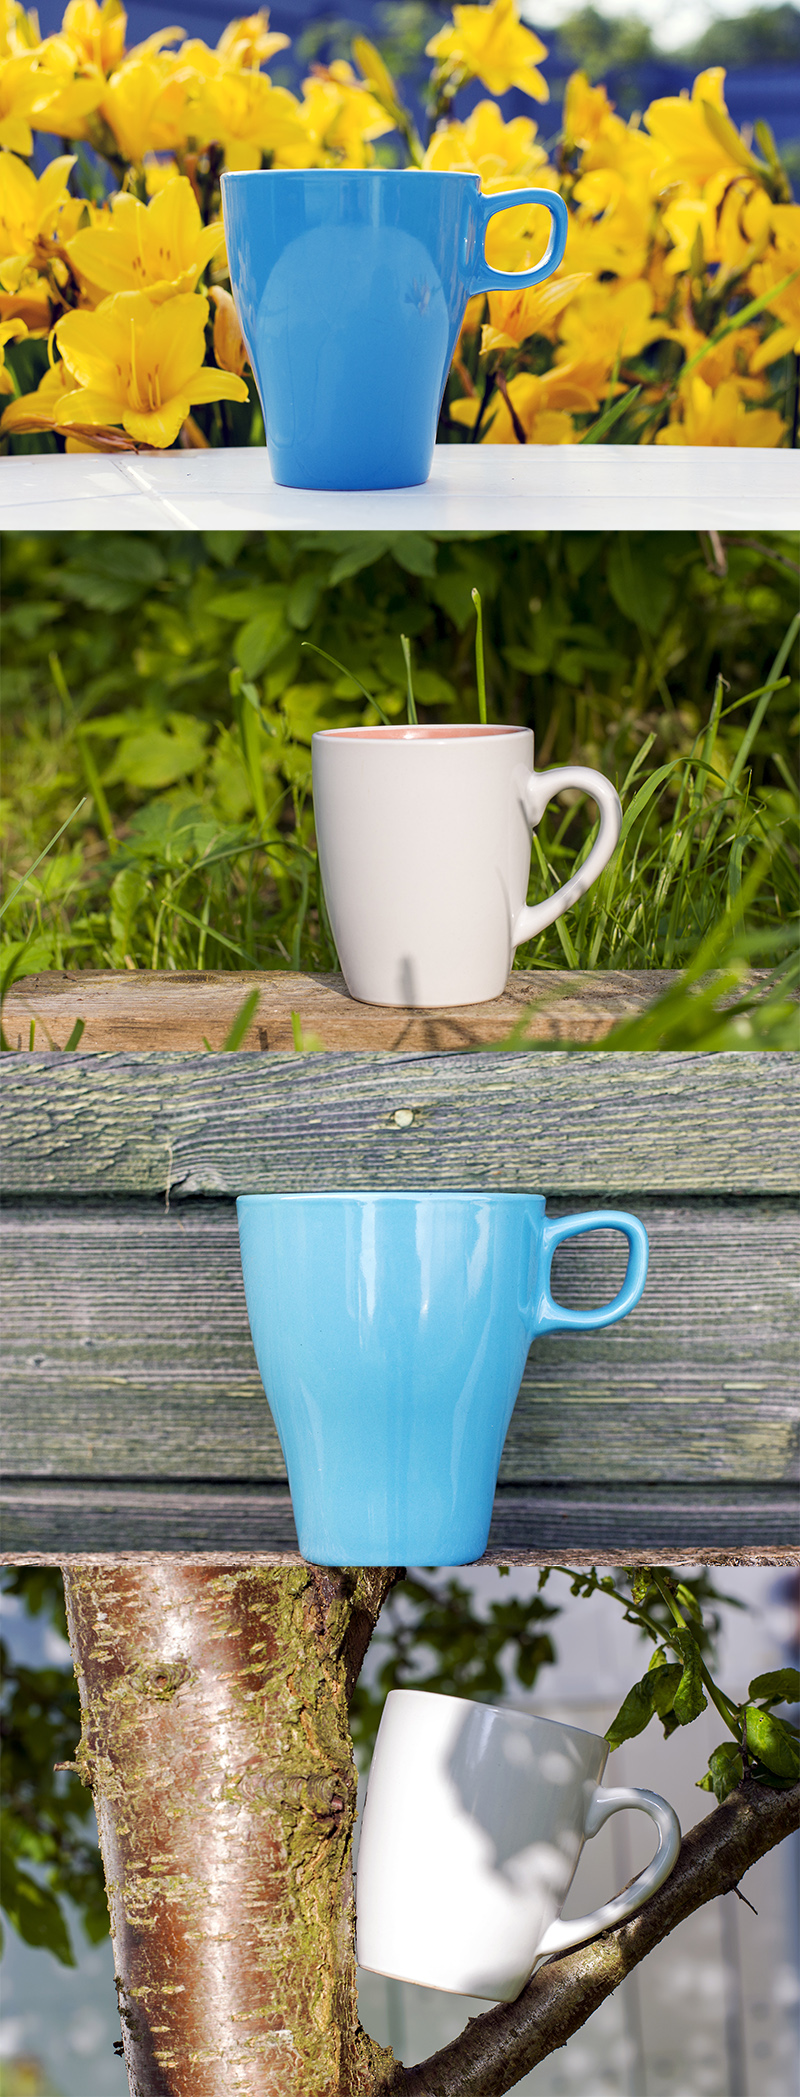 The mugs went out for a walk. They can be seen on a bench, near flowers and even between branches.